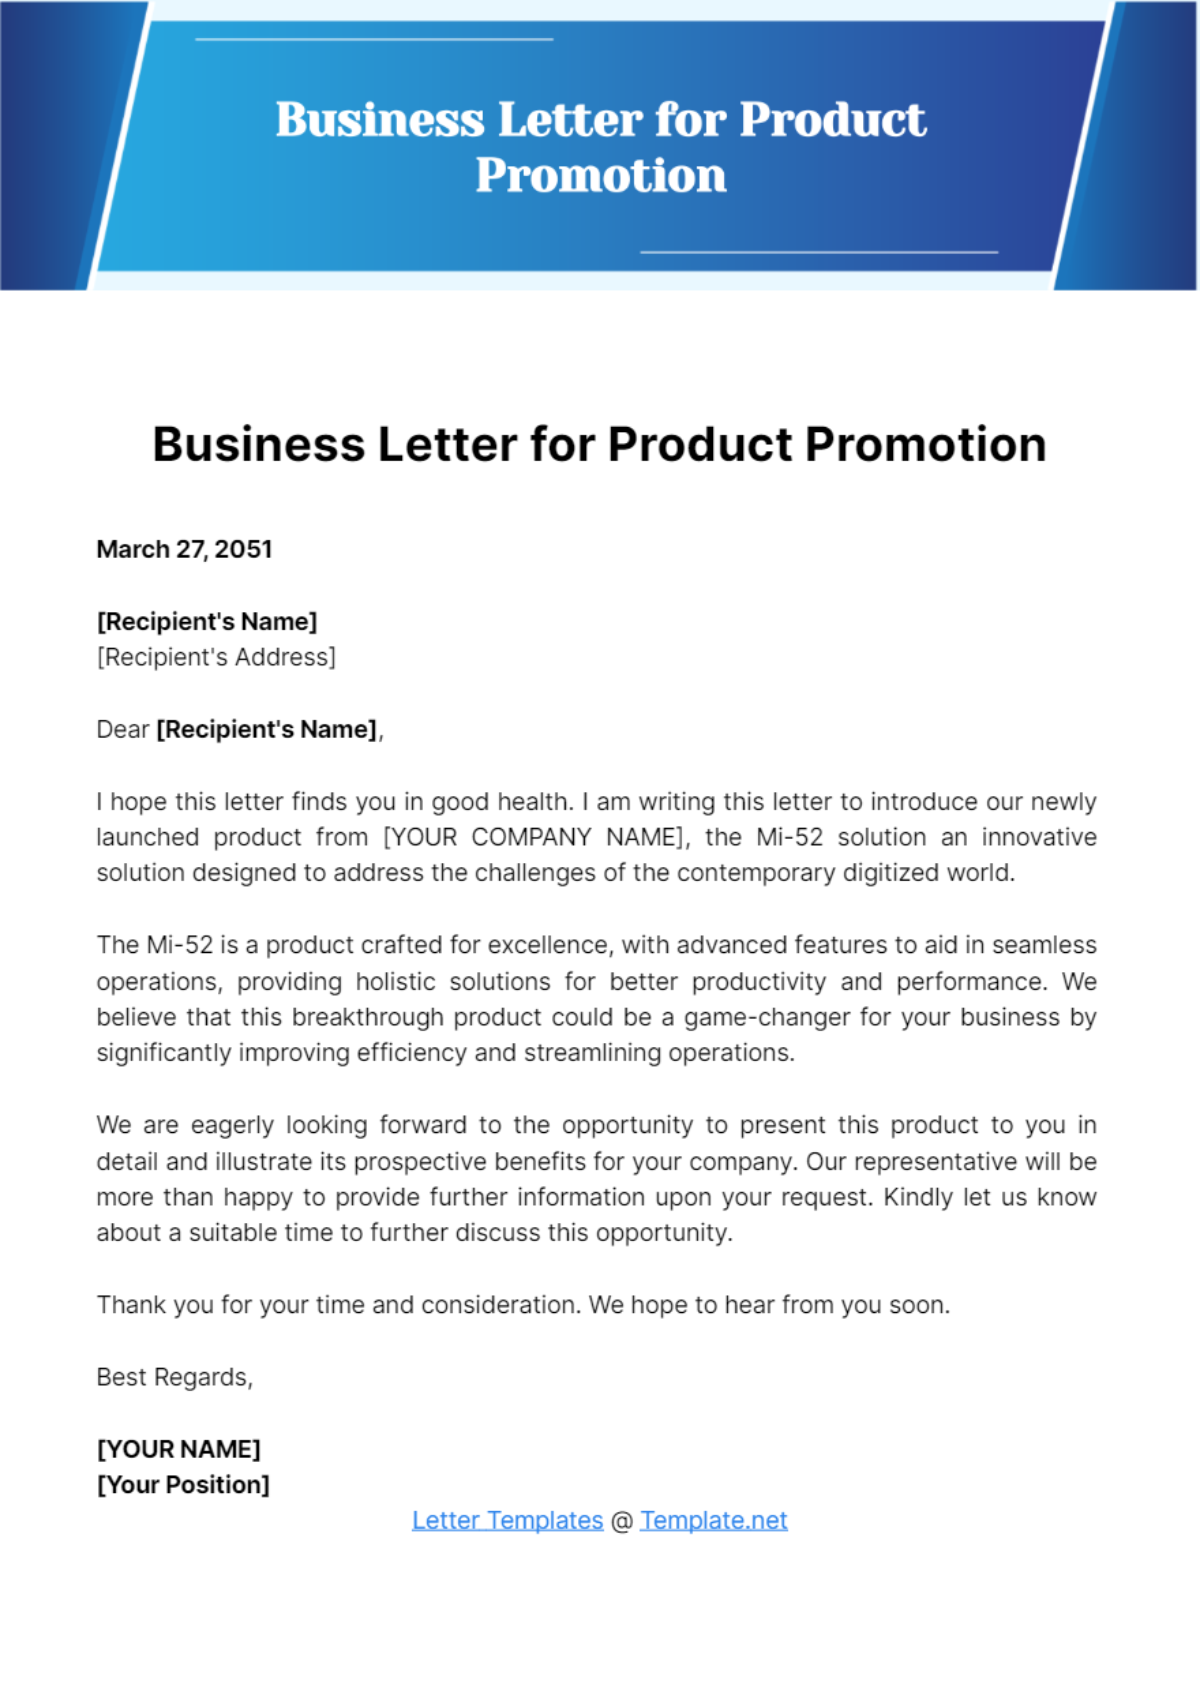 Business Letter for Product Promotion Template